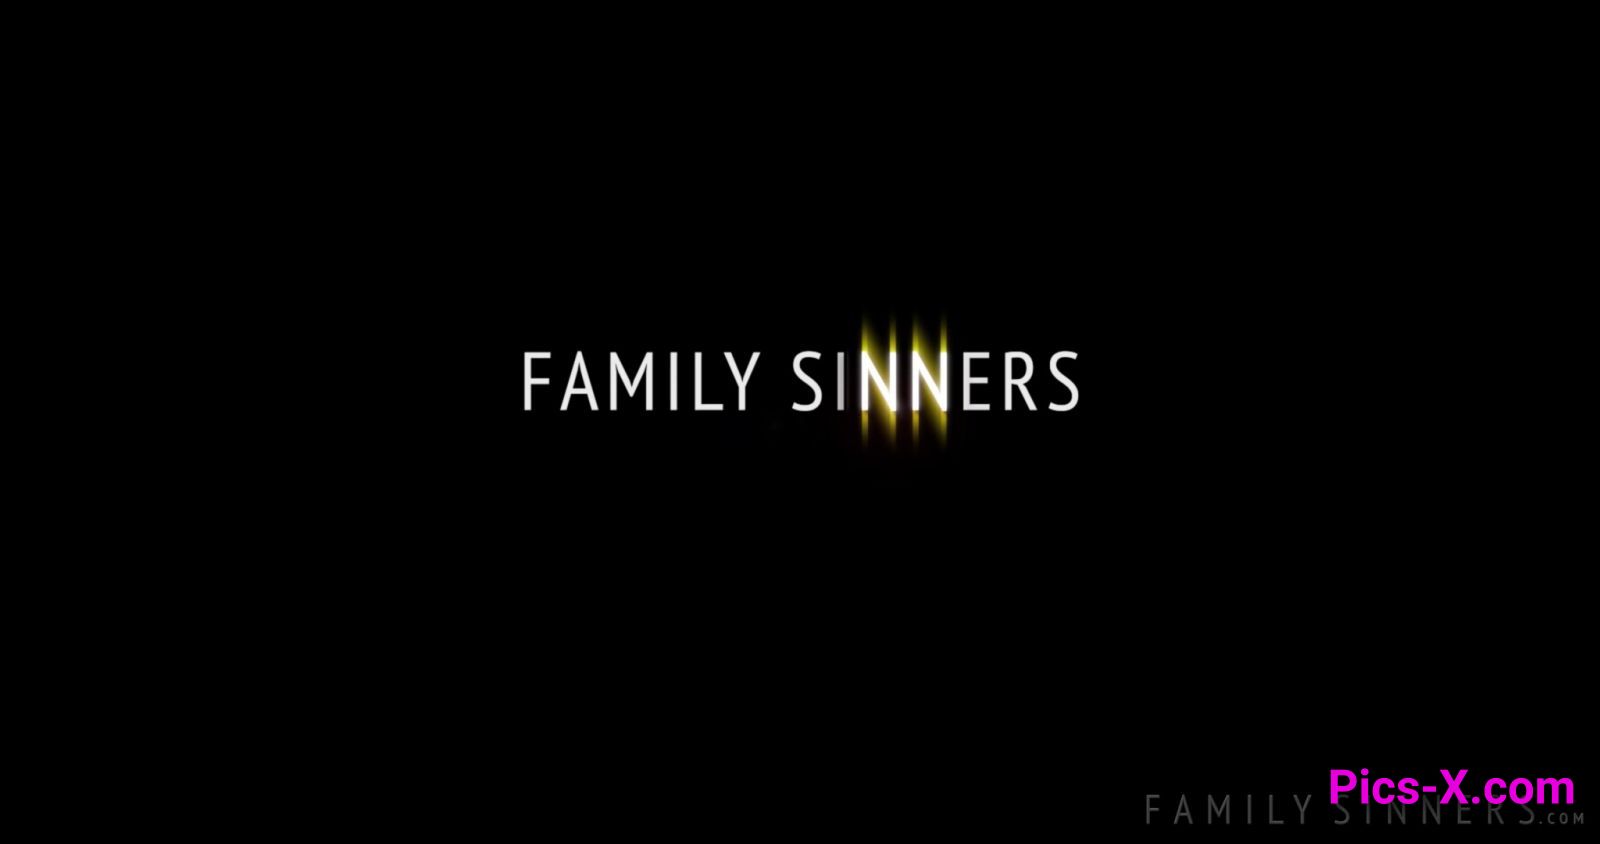 One Last Time - Family Sinners - Image 1